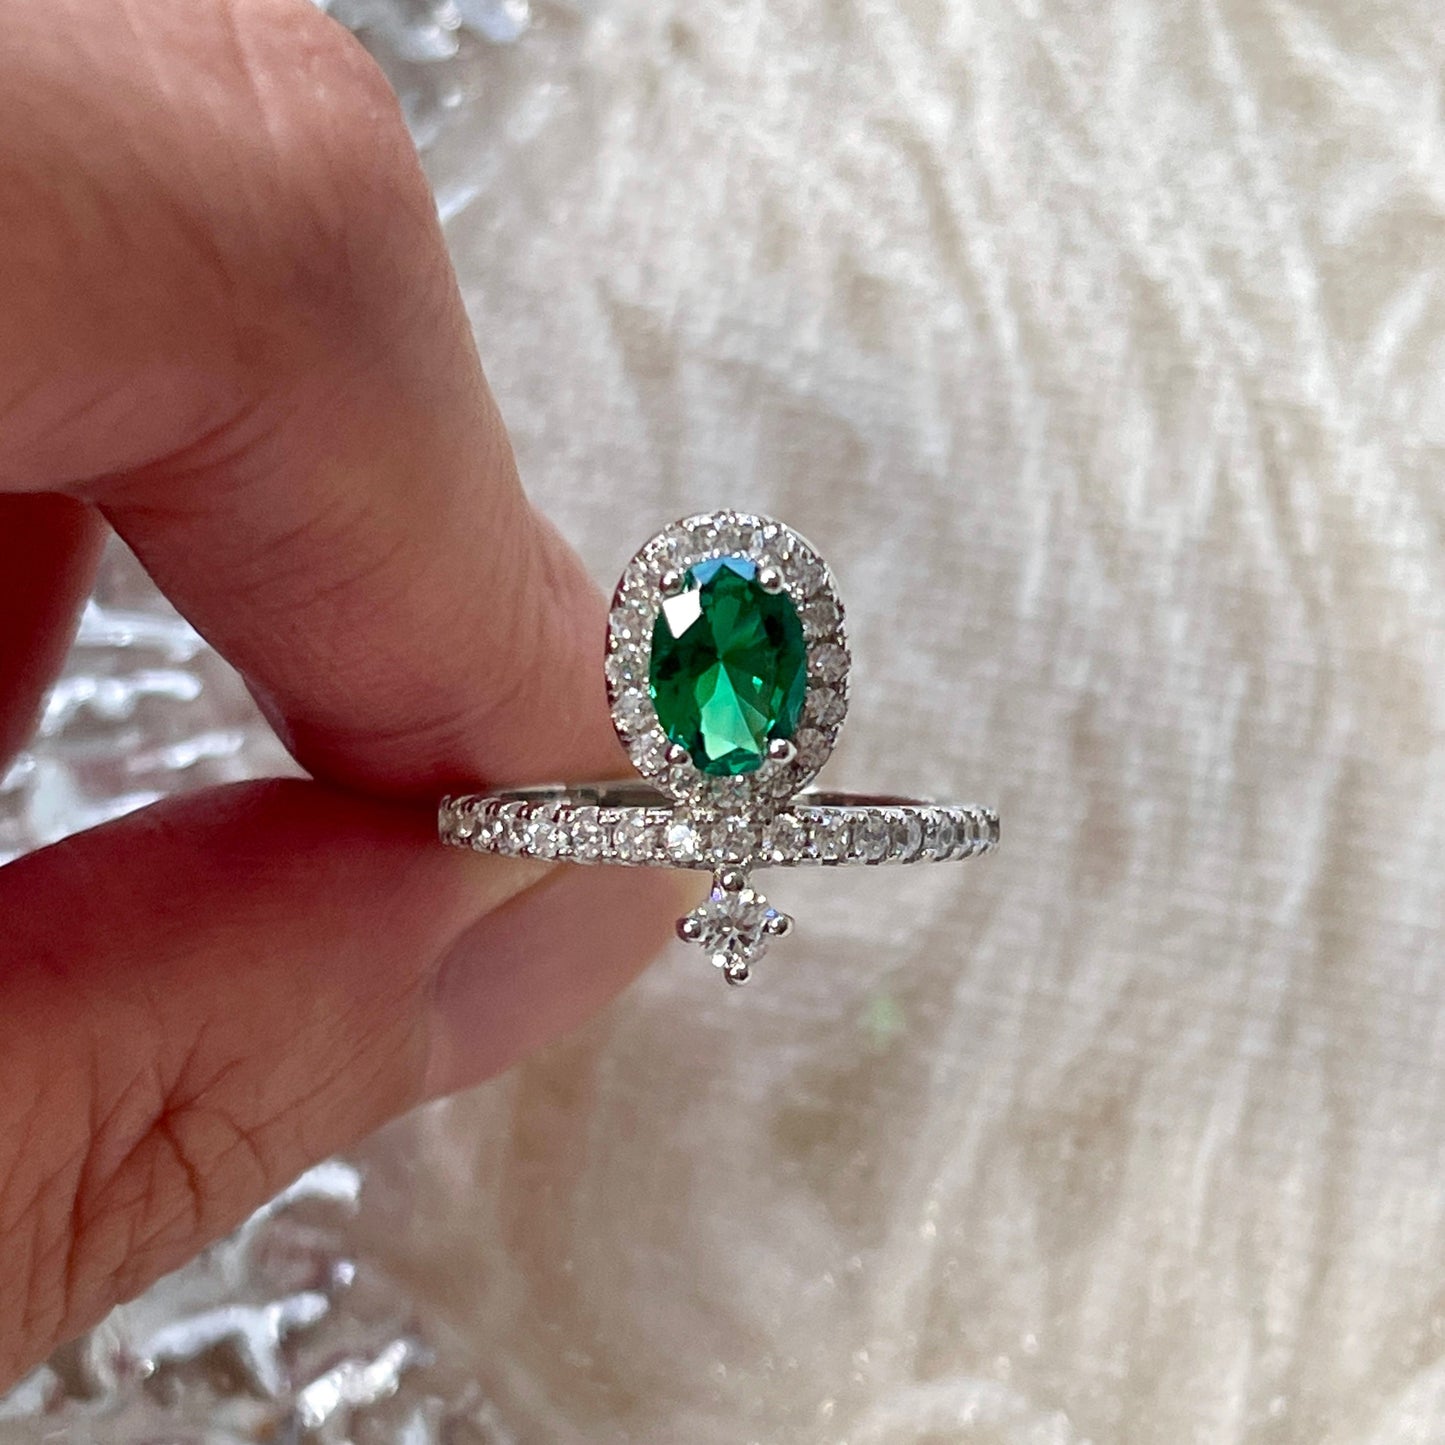 Vintage Emerald Engagement Wedding Ring, Oval Cut 1 Carat Emerald Ring, Green Emerald Ring, Emerald Diamond Bridal Ring, Anniversary Gift